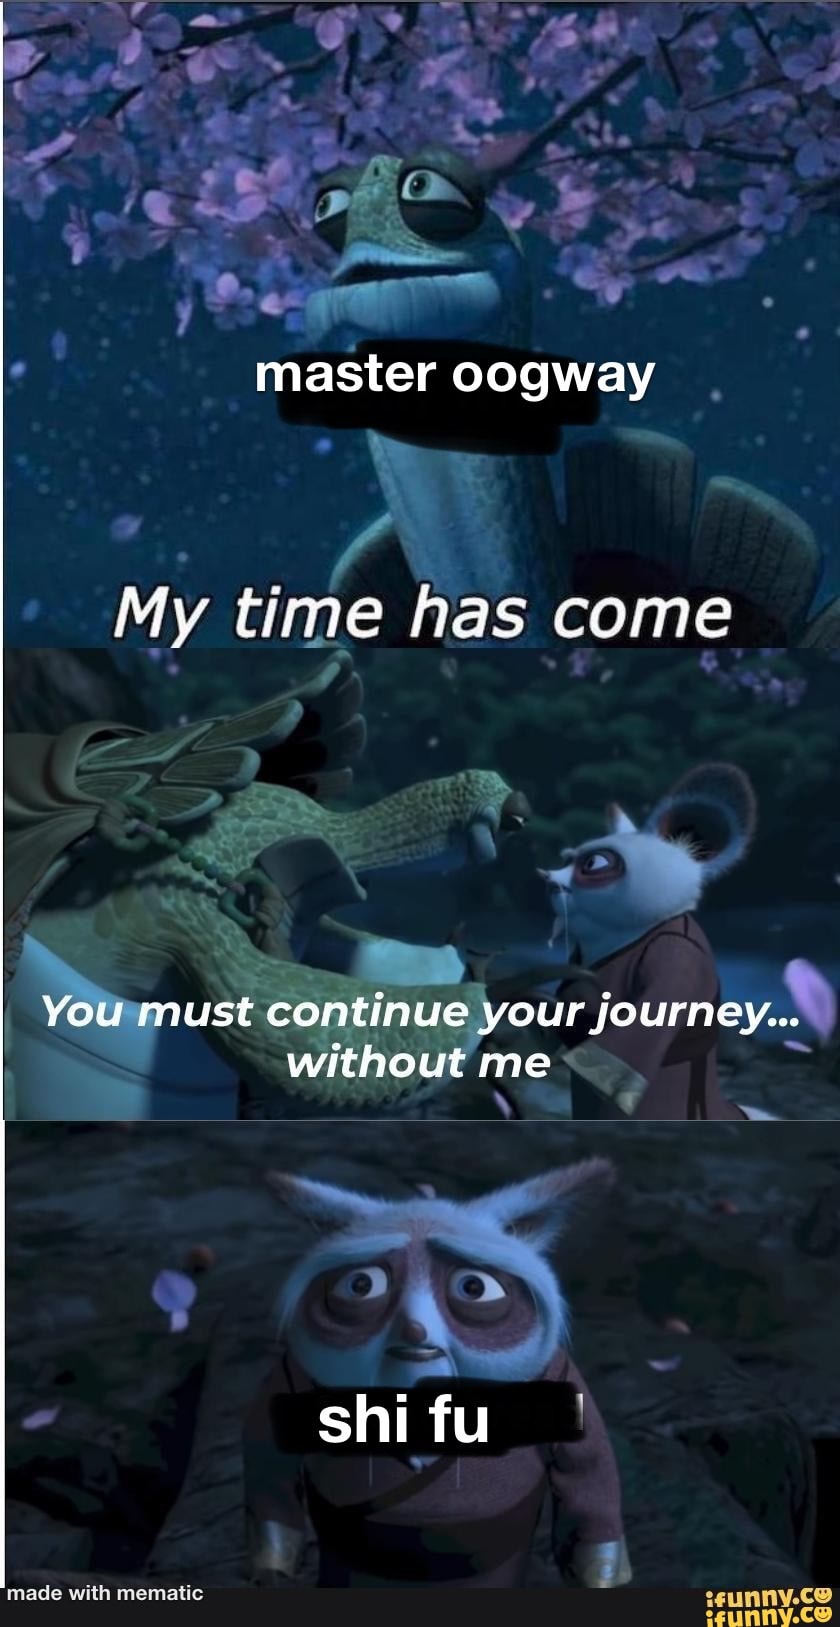 continue your journey without me